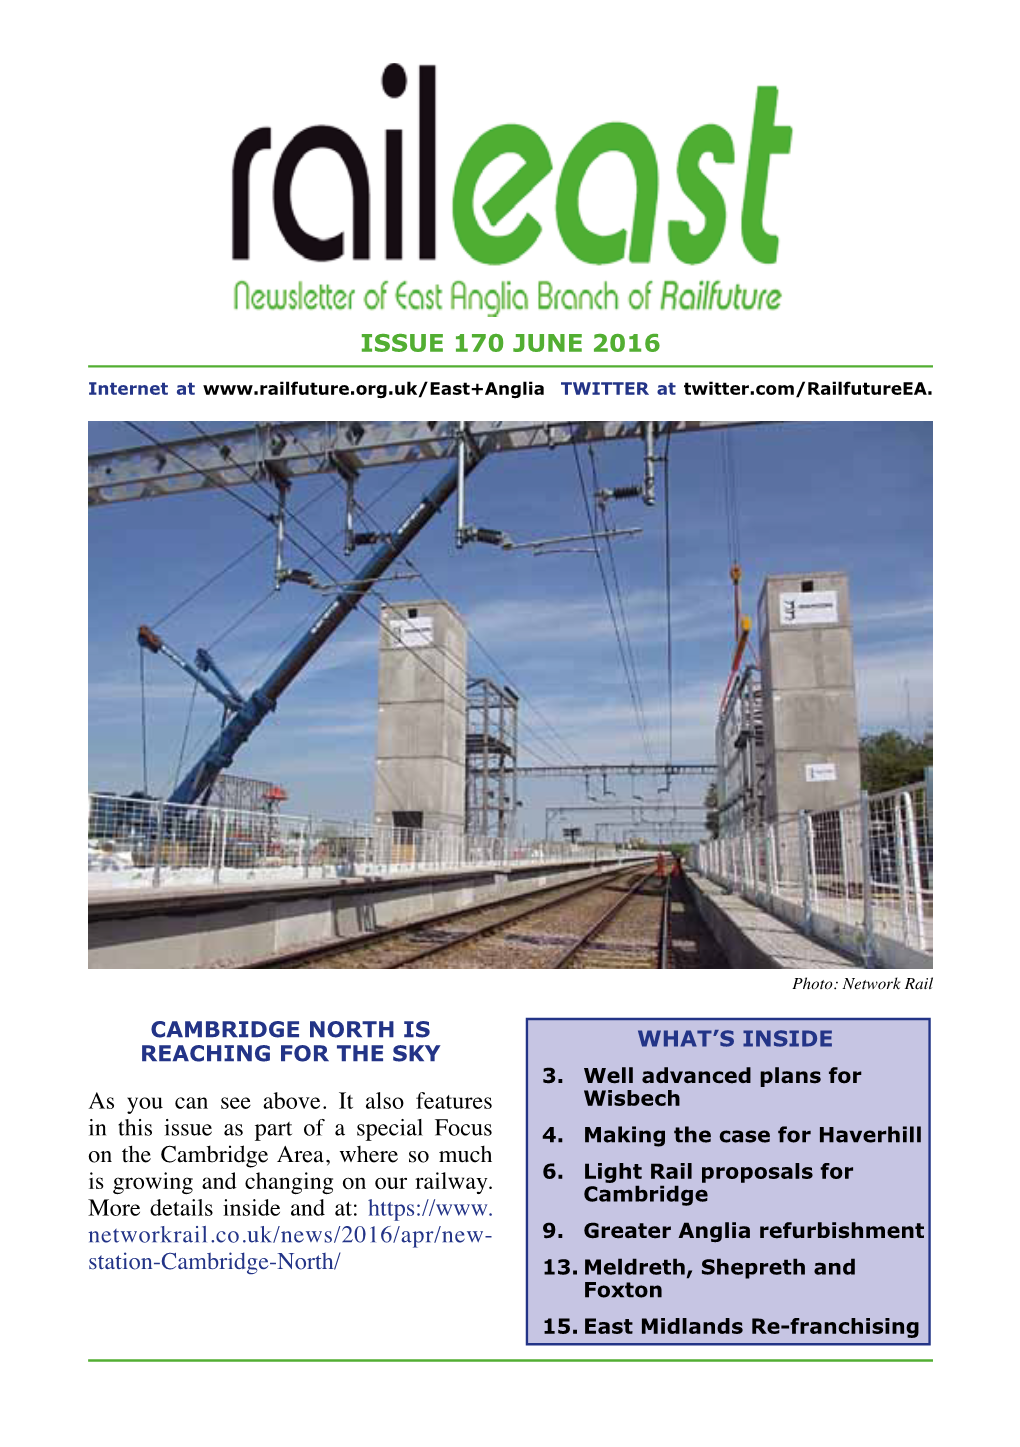 ISSUE 170 JUNE 2016 As You Can See Above. It Also Features in This Issue As Part of a Special Focus on the Cambridge Area, Where